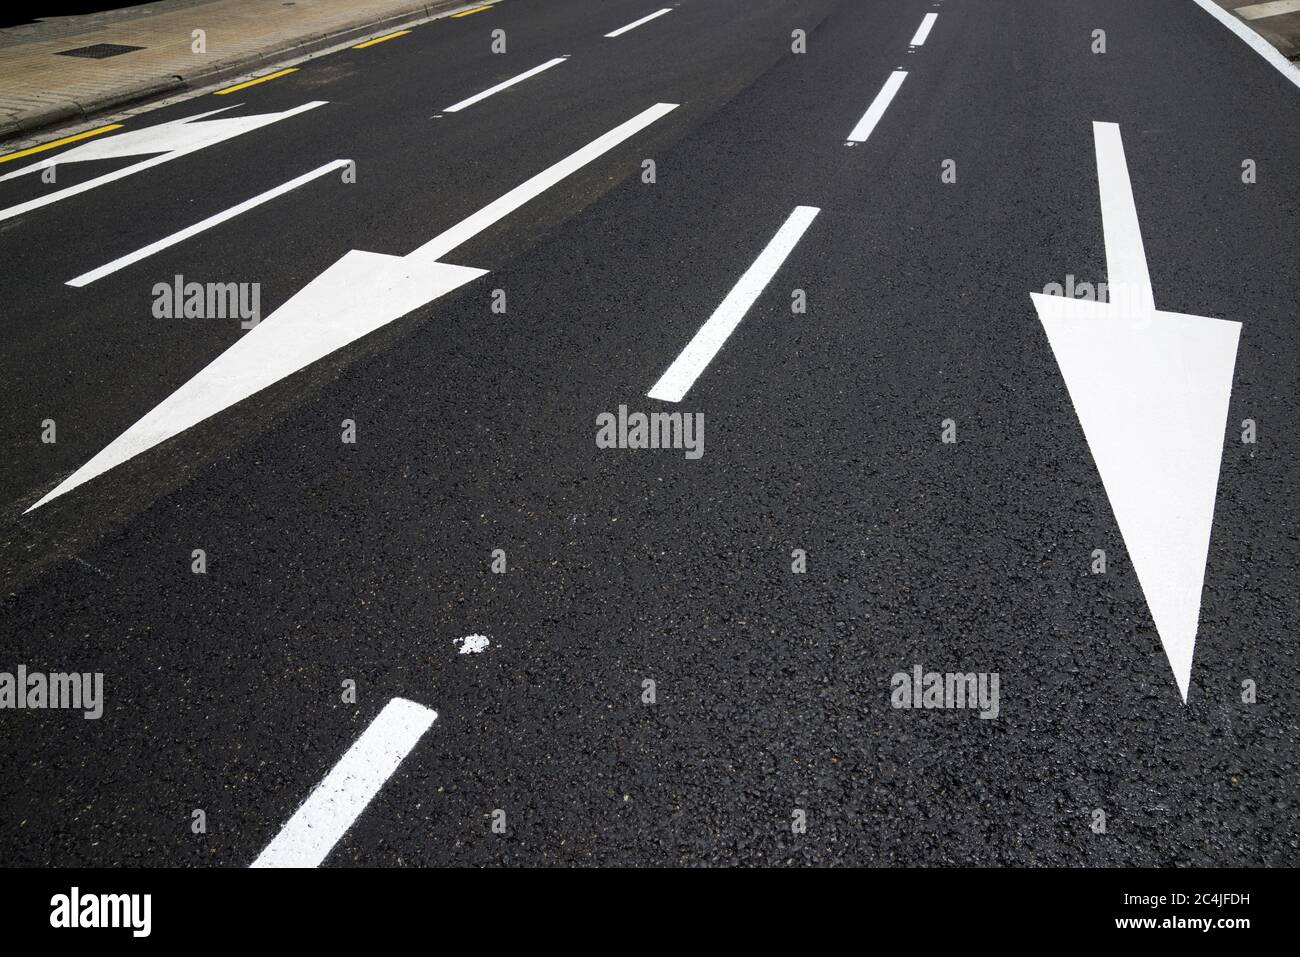 Arrow directional signals painted on the floor in Spain Stock Photo